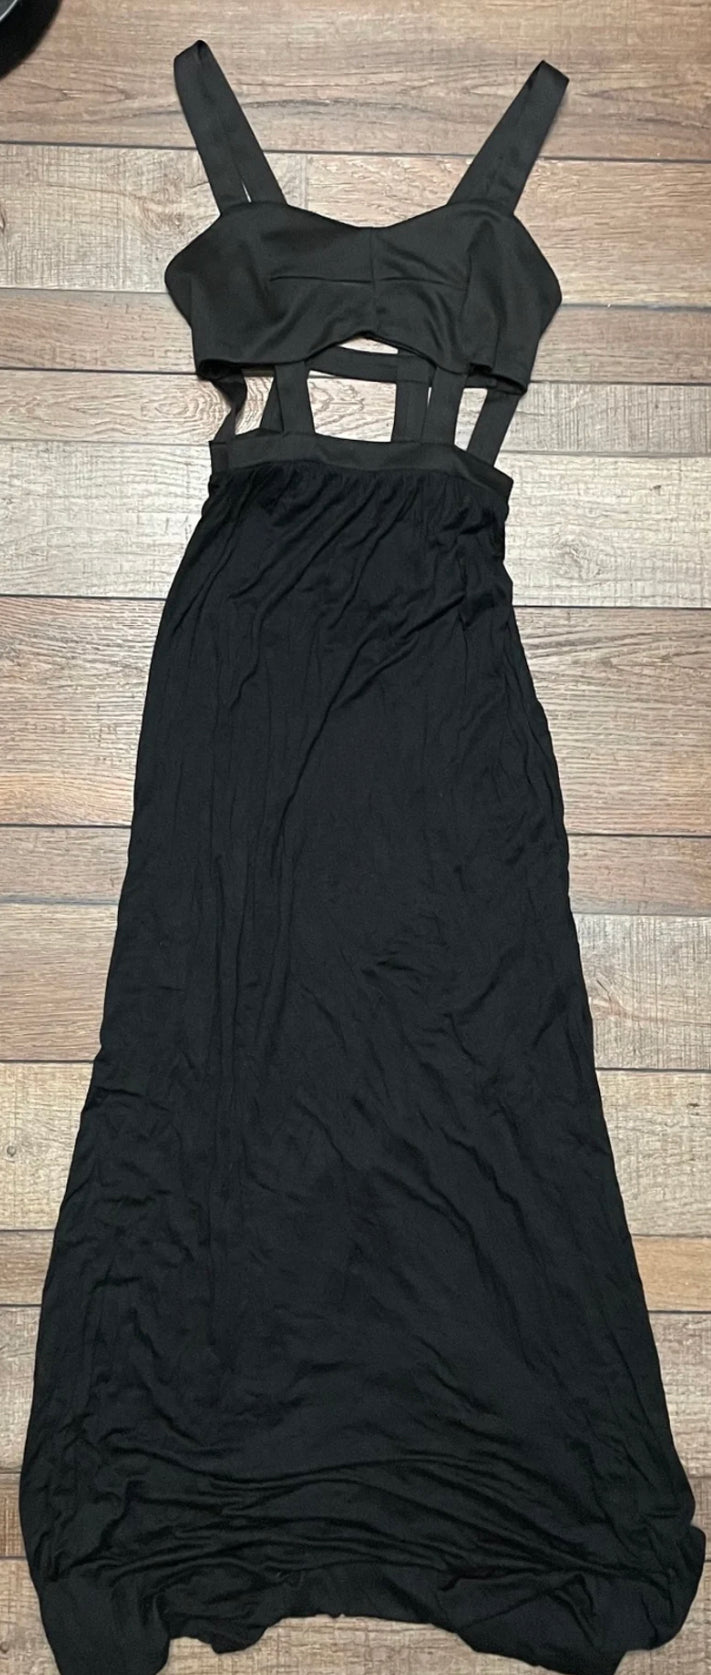 Urban Outfitter’s Maxi Dress